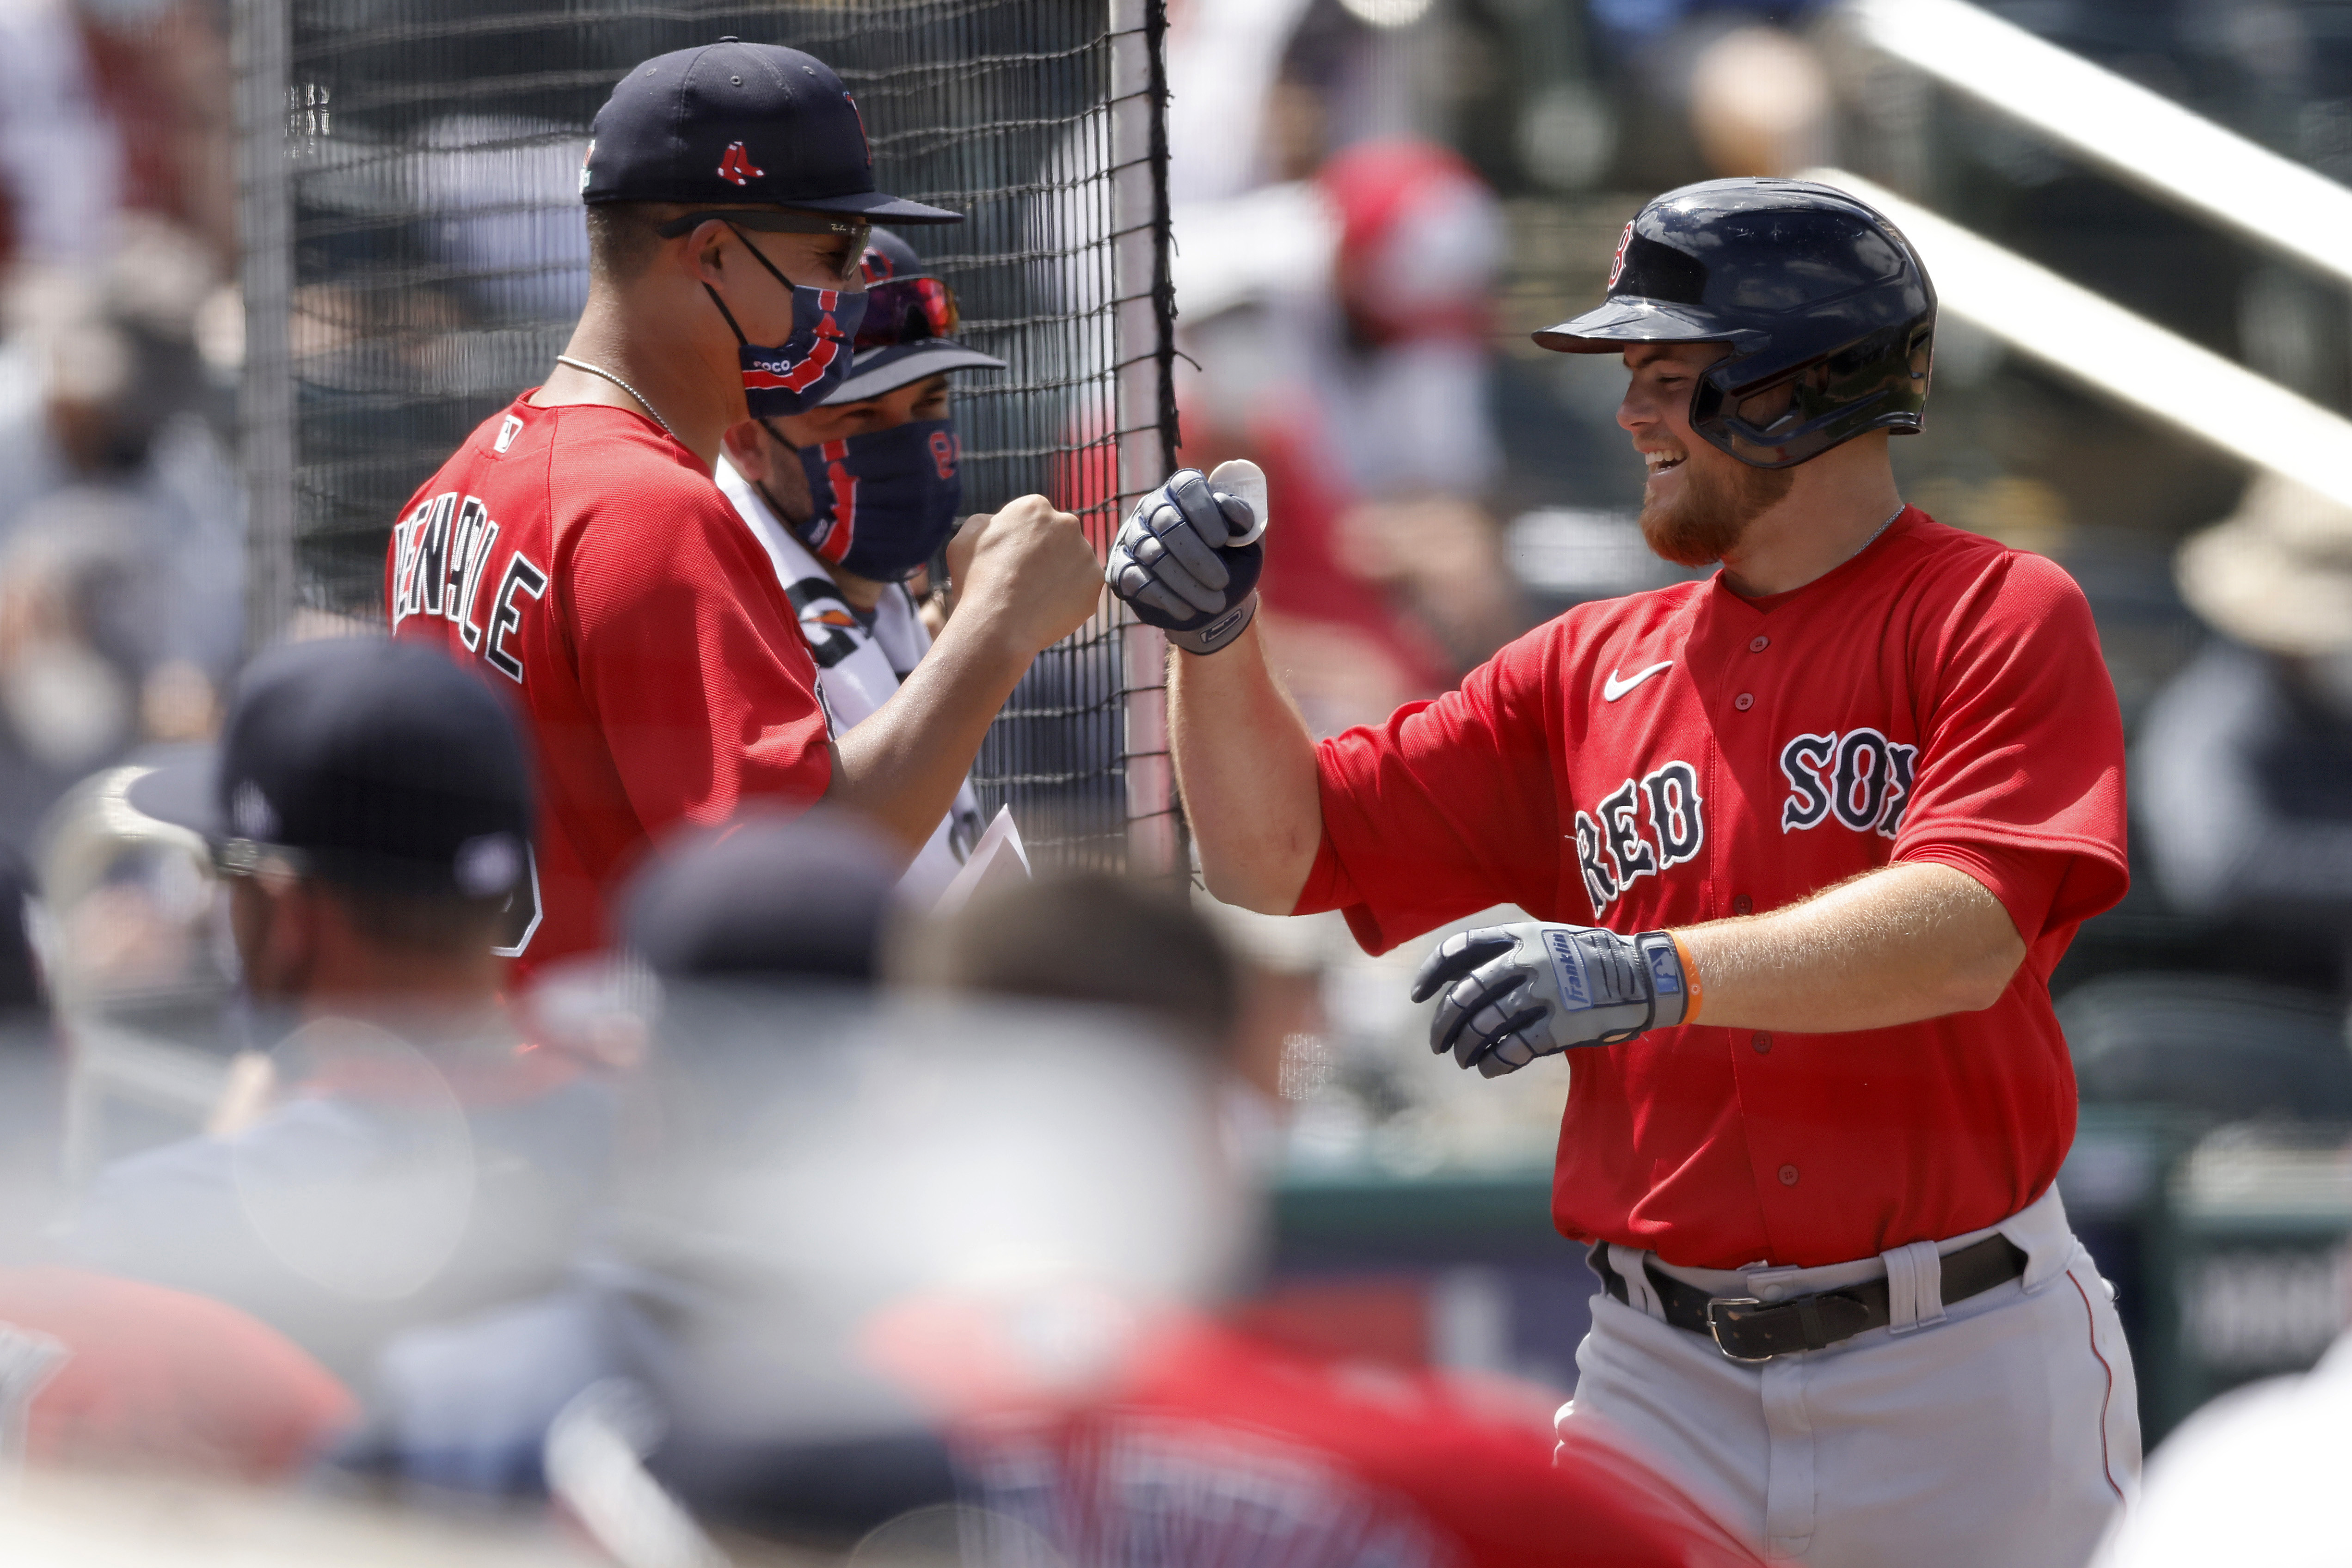 Matt Barnes, eight others cleared to rejoin Red Sox after